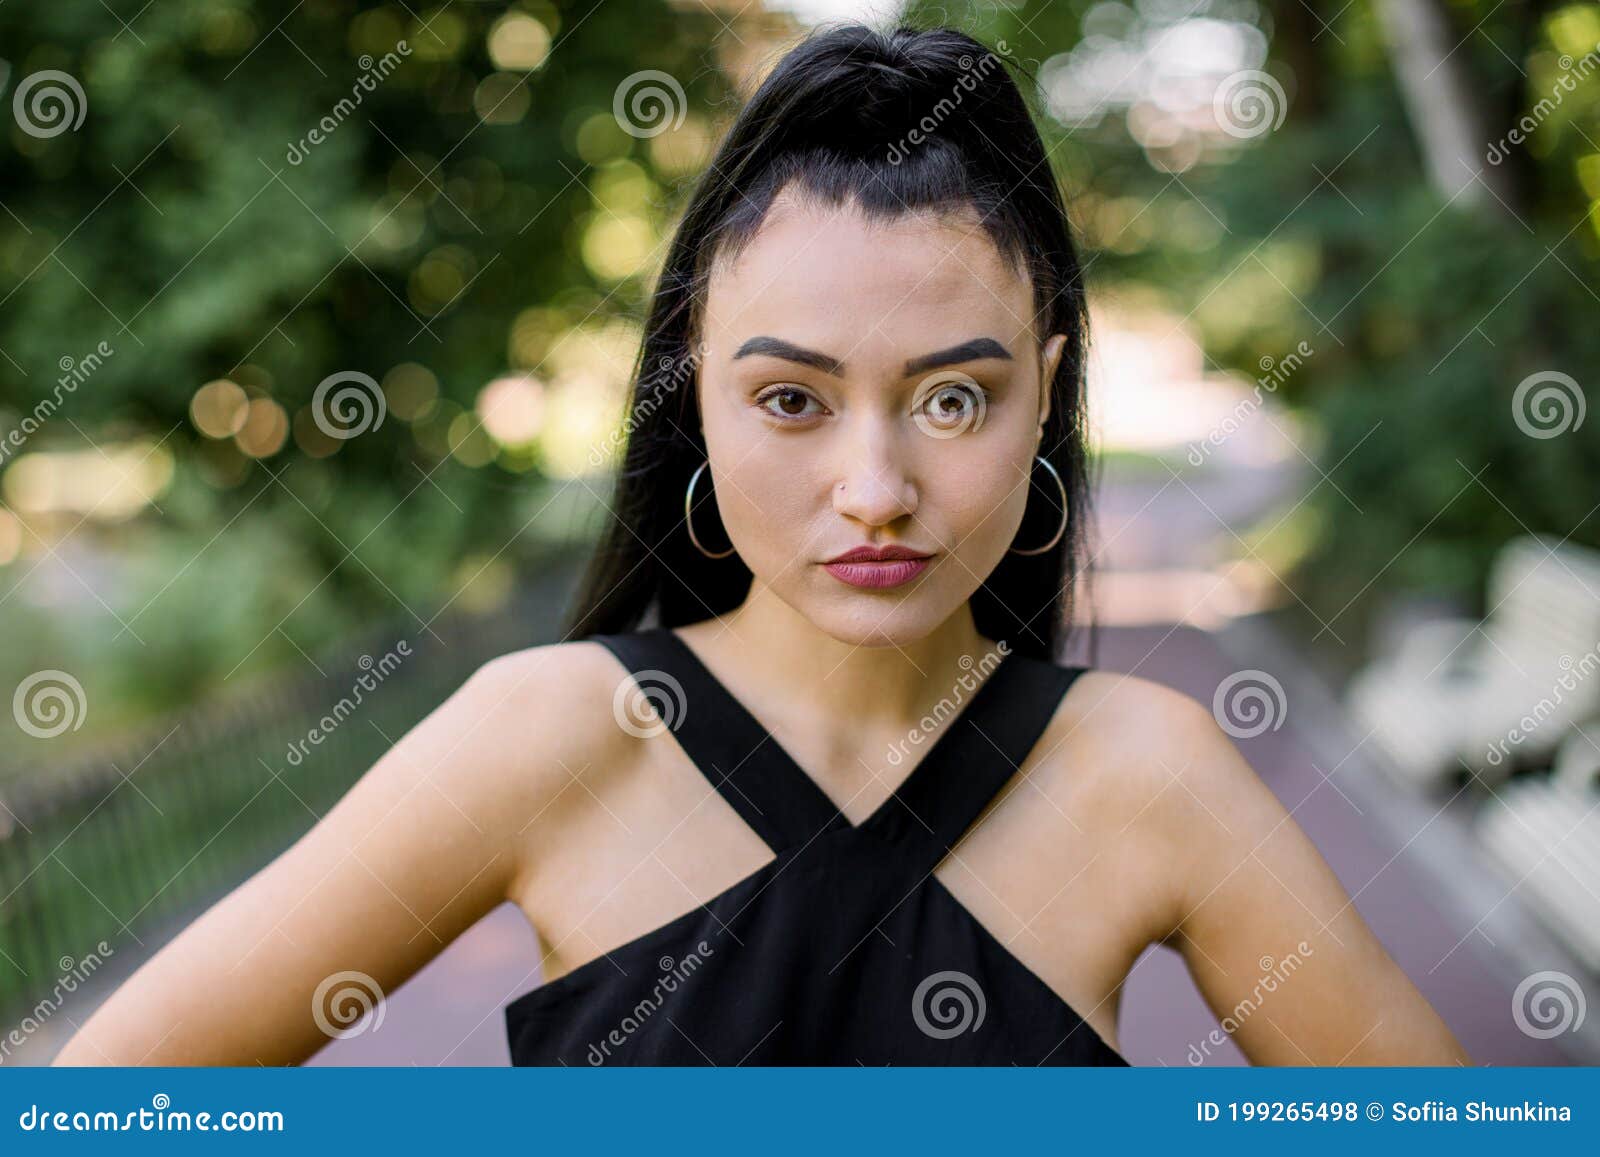 Portrait of Pretty Asian Girl with Ponytail Black Hair, Wearing Summer ...